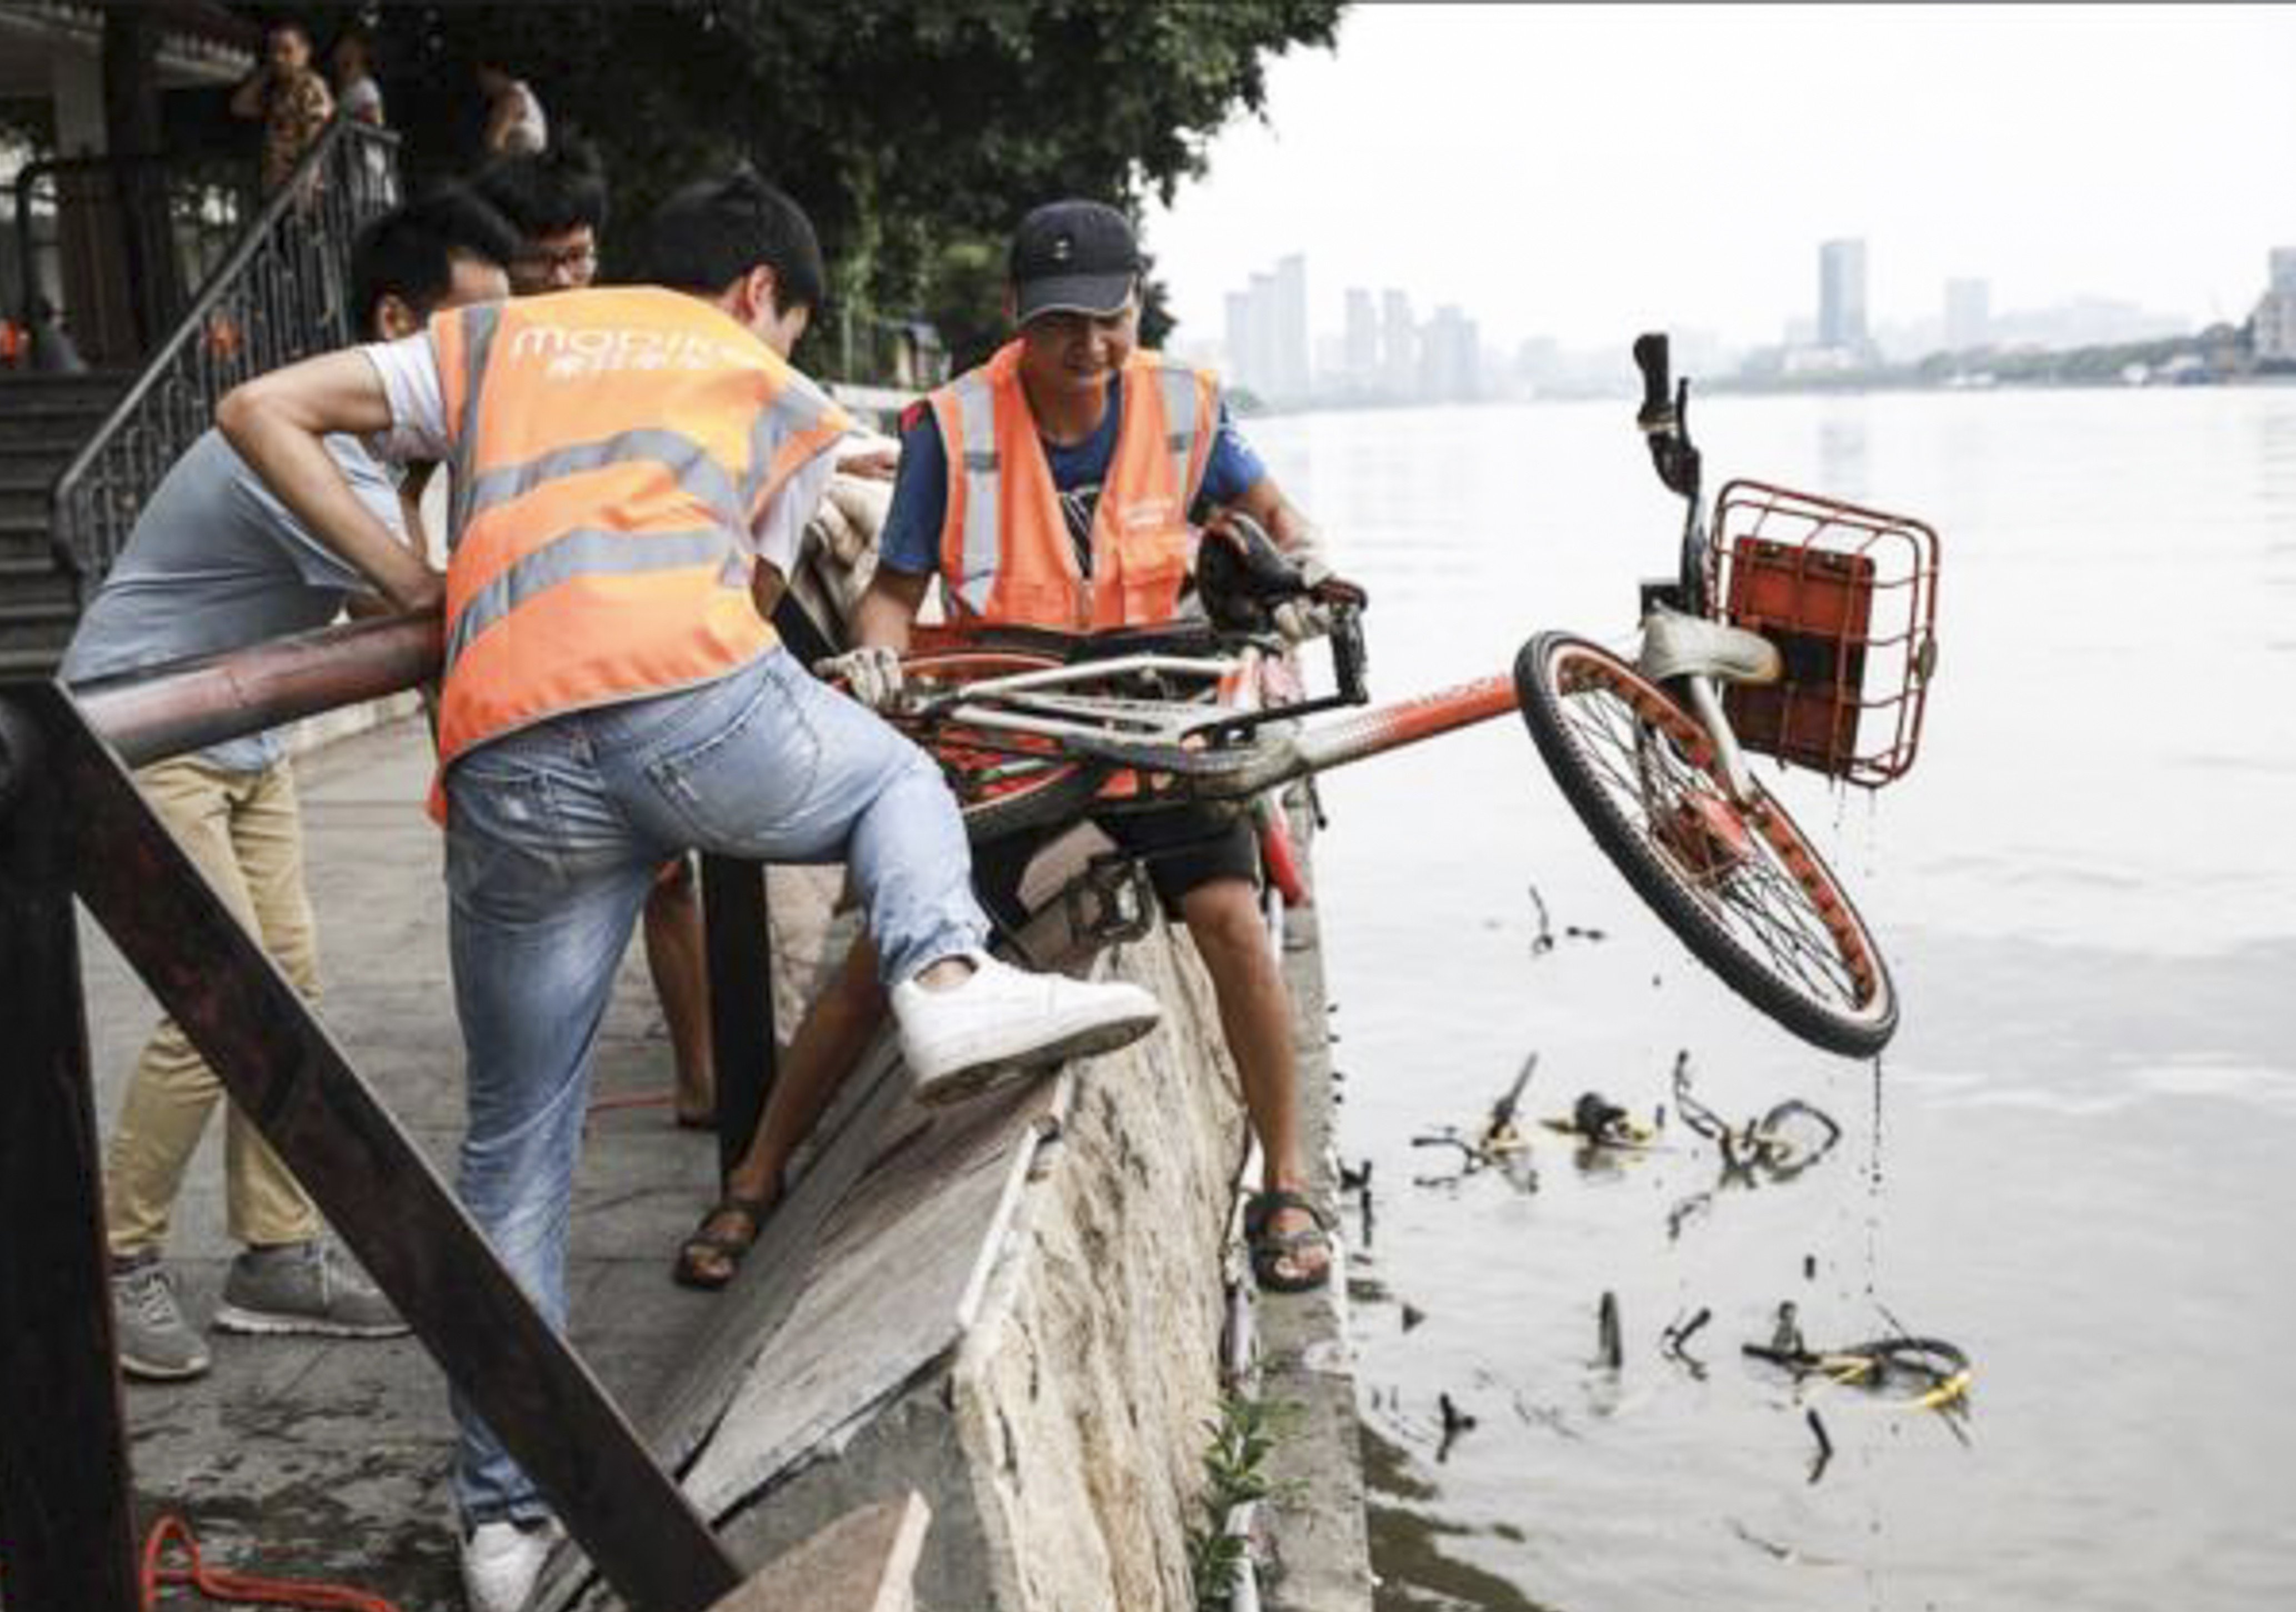 Two bike-sharing companies in southern China have recovered more than 3,000 bicycles from rivers during clean-up operations. (Picture: ThePaper.cn)